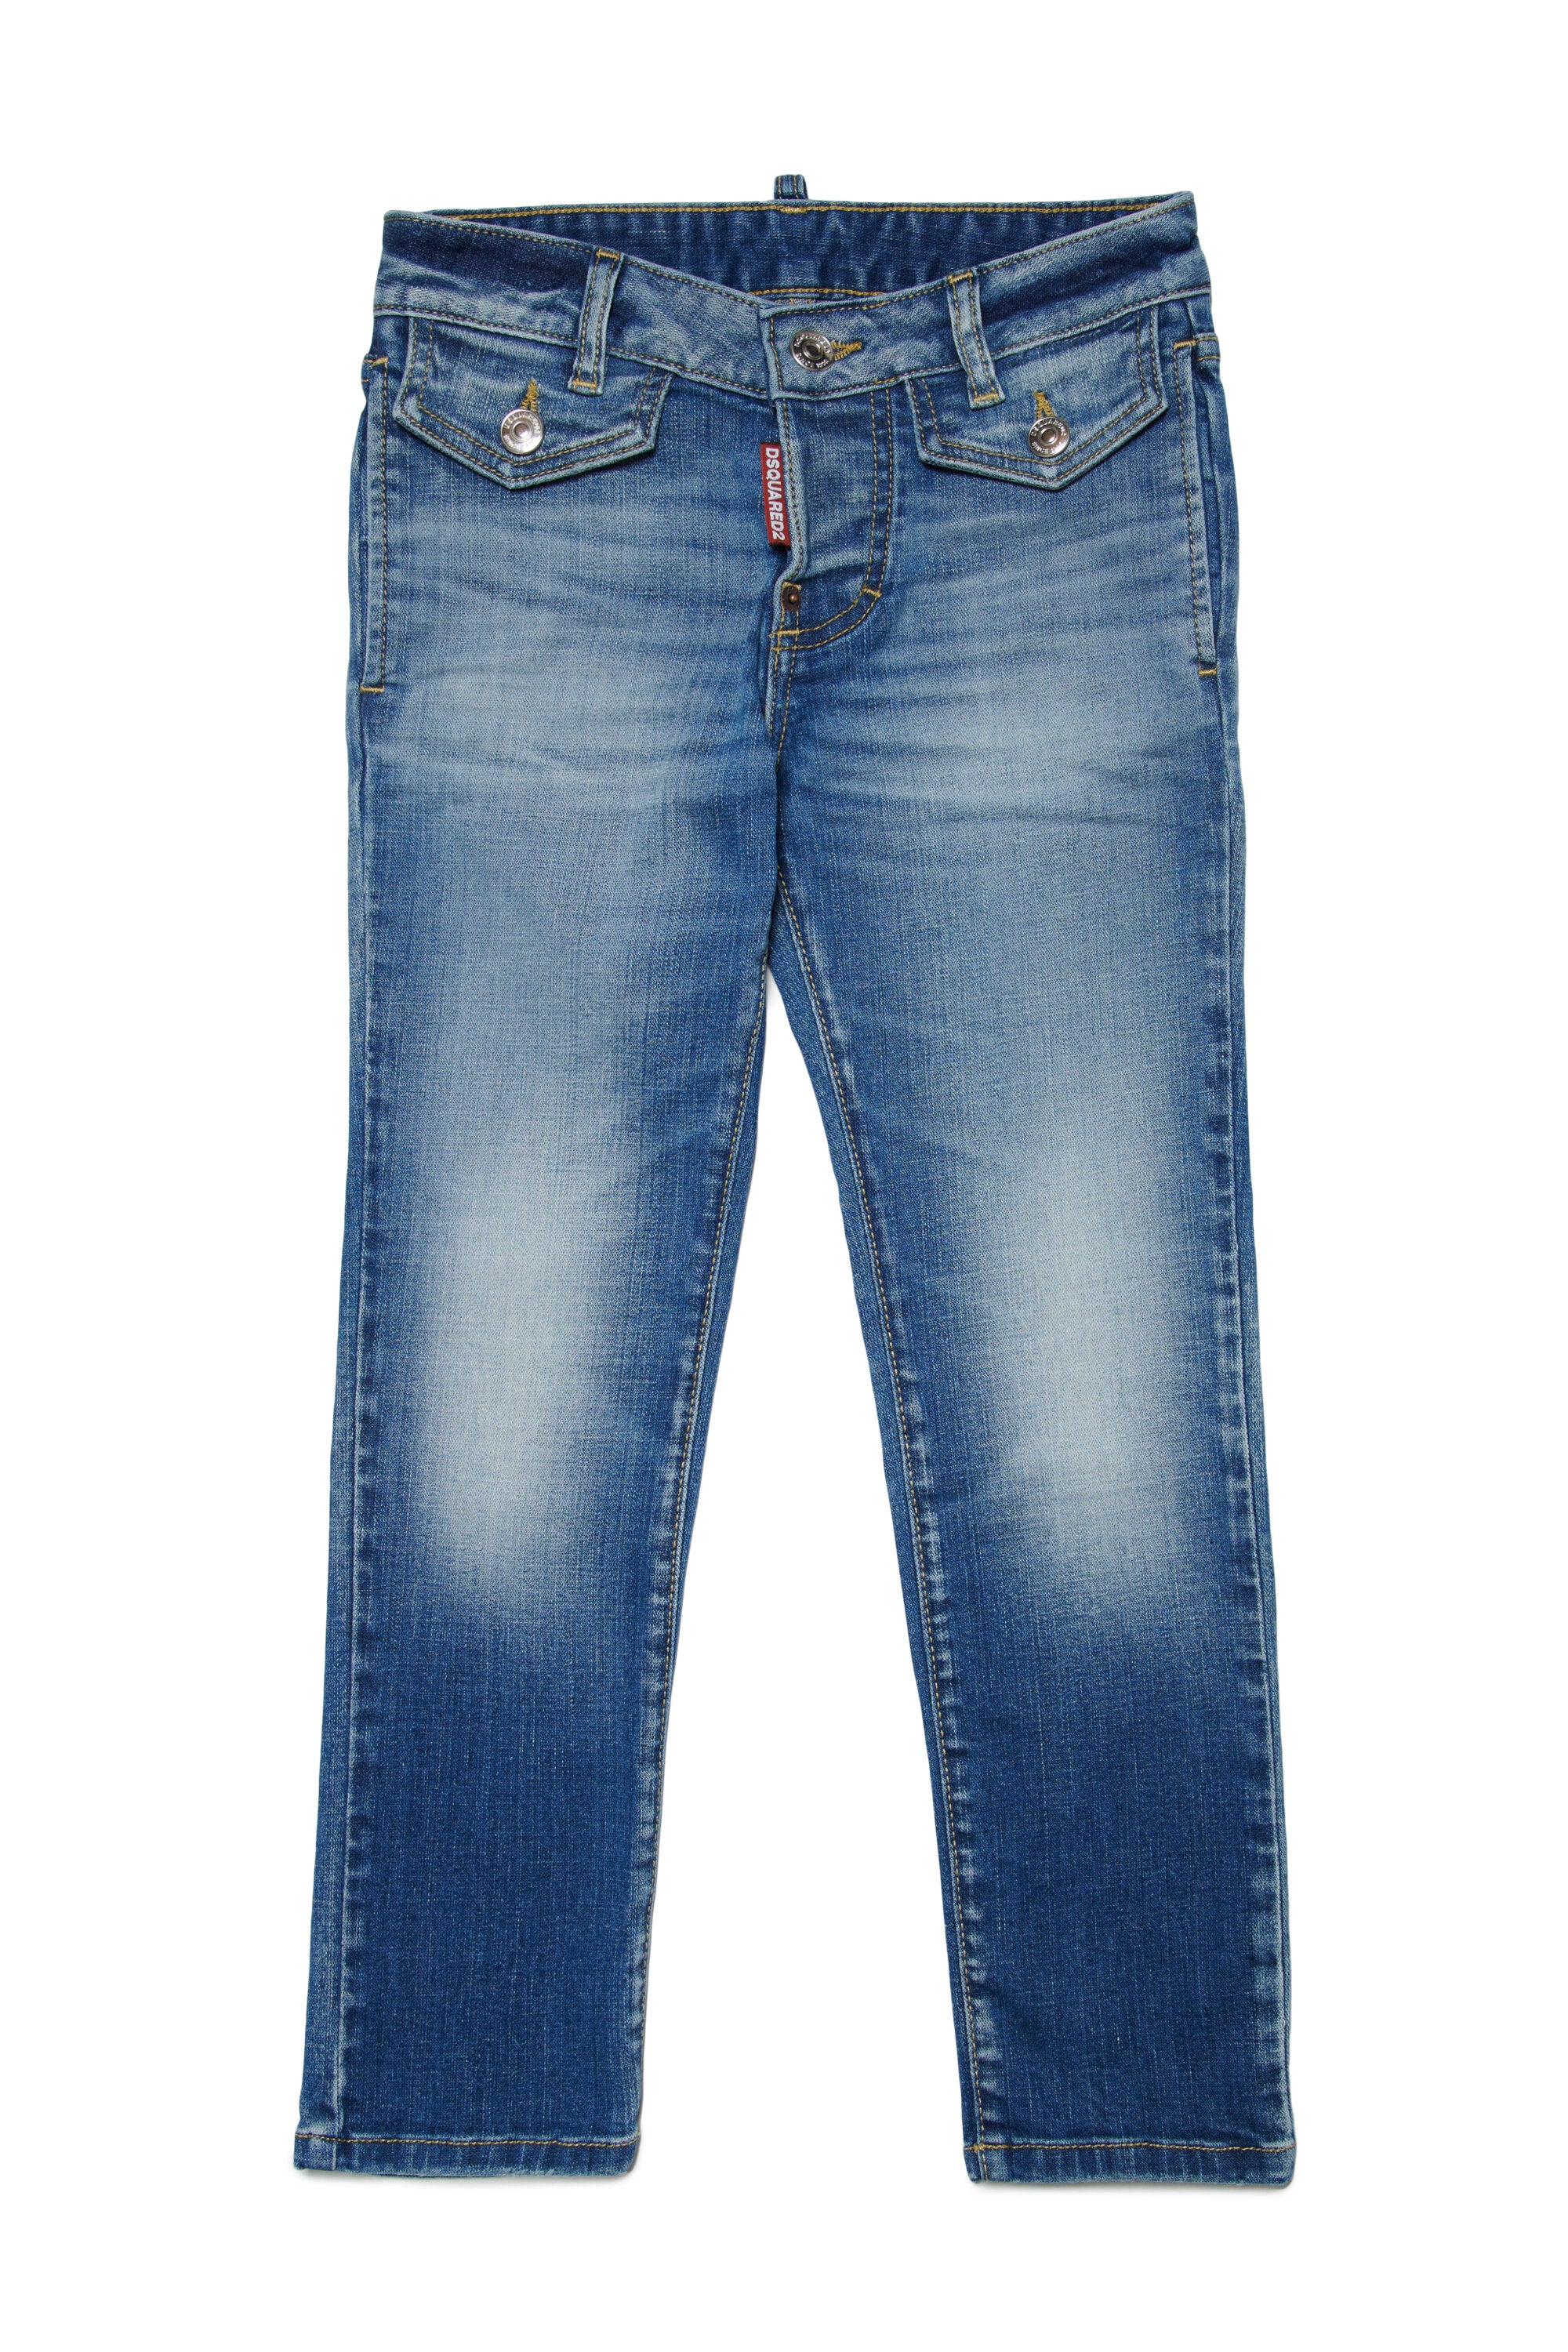 Shaded blue slim jeans